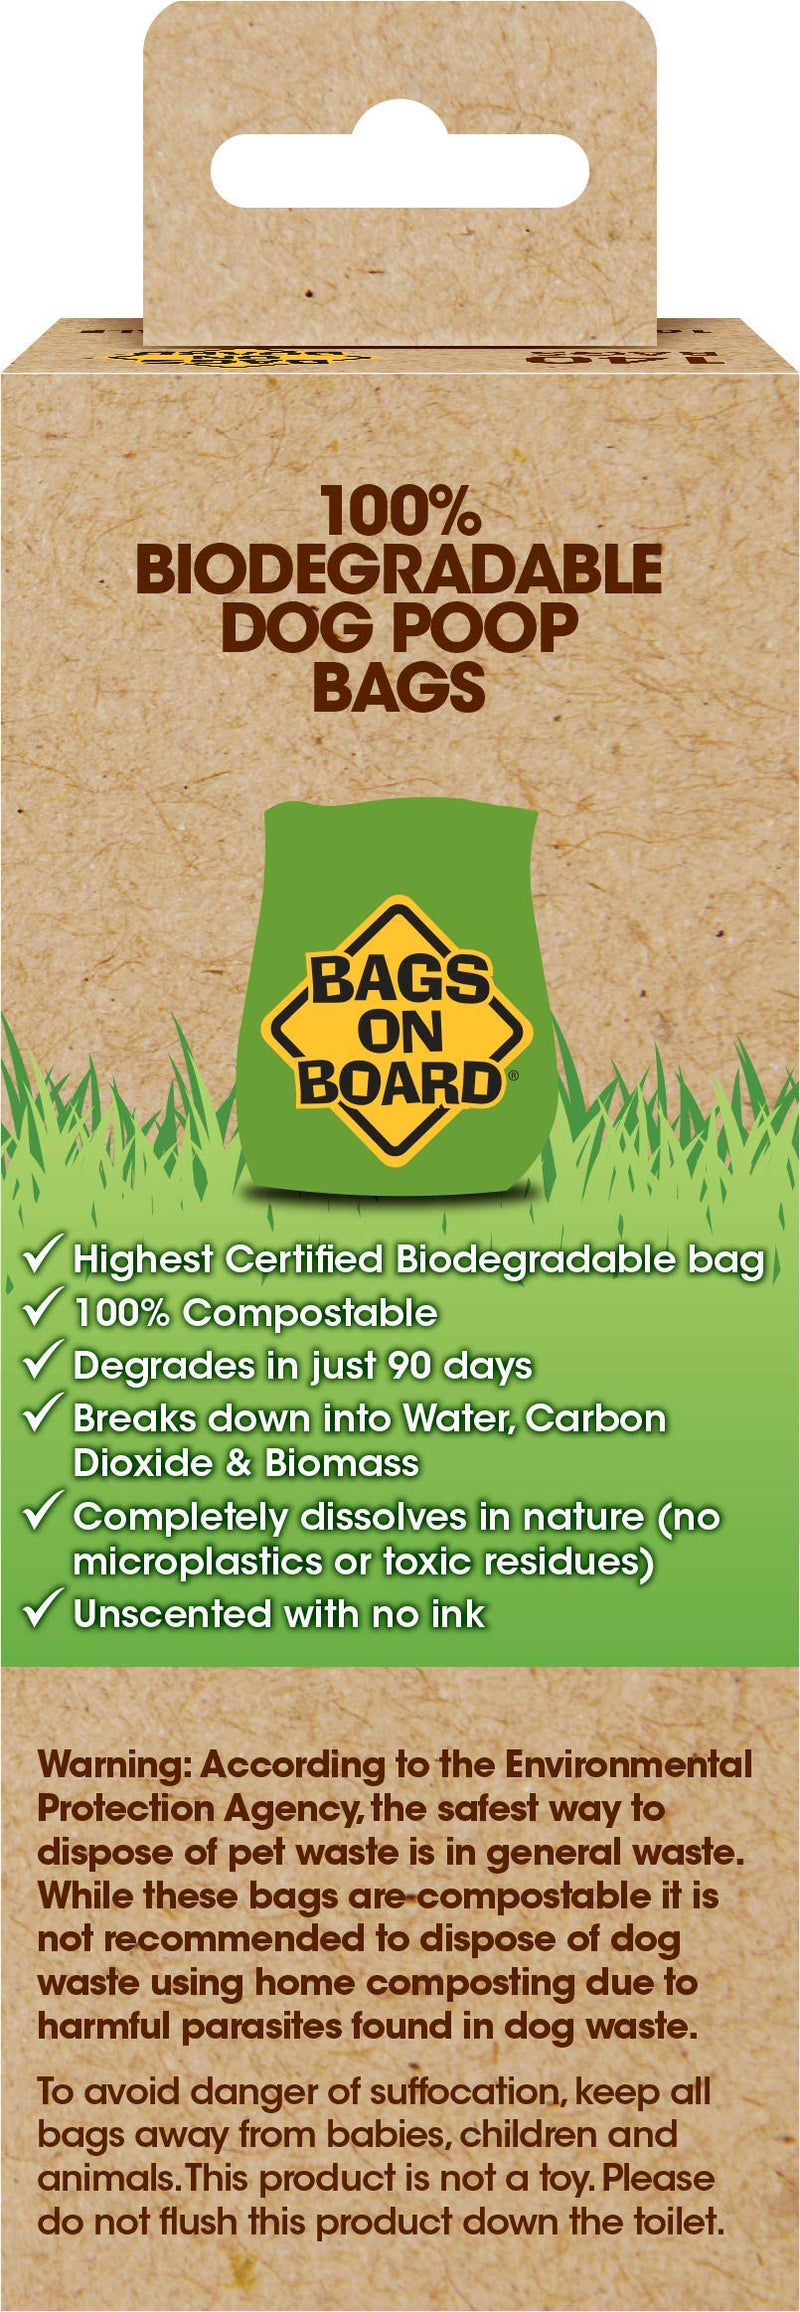 Bags on Board 100% Biodegradable & Compostable Dog poop bags 140 Bags - PawsPlanet Australia